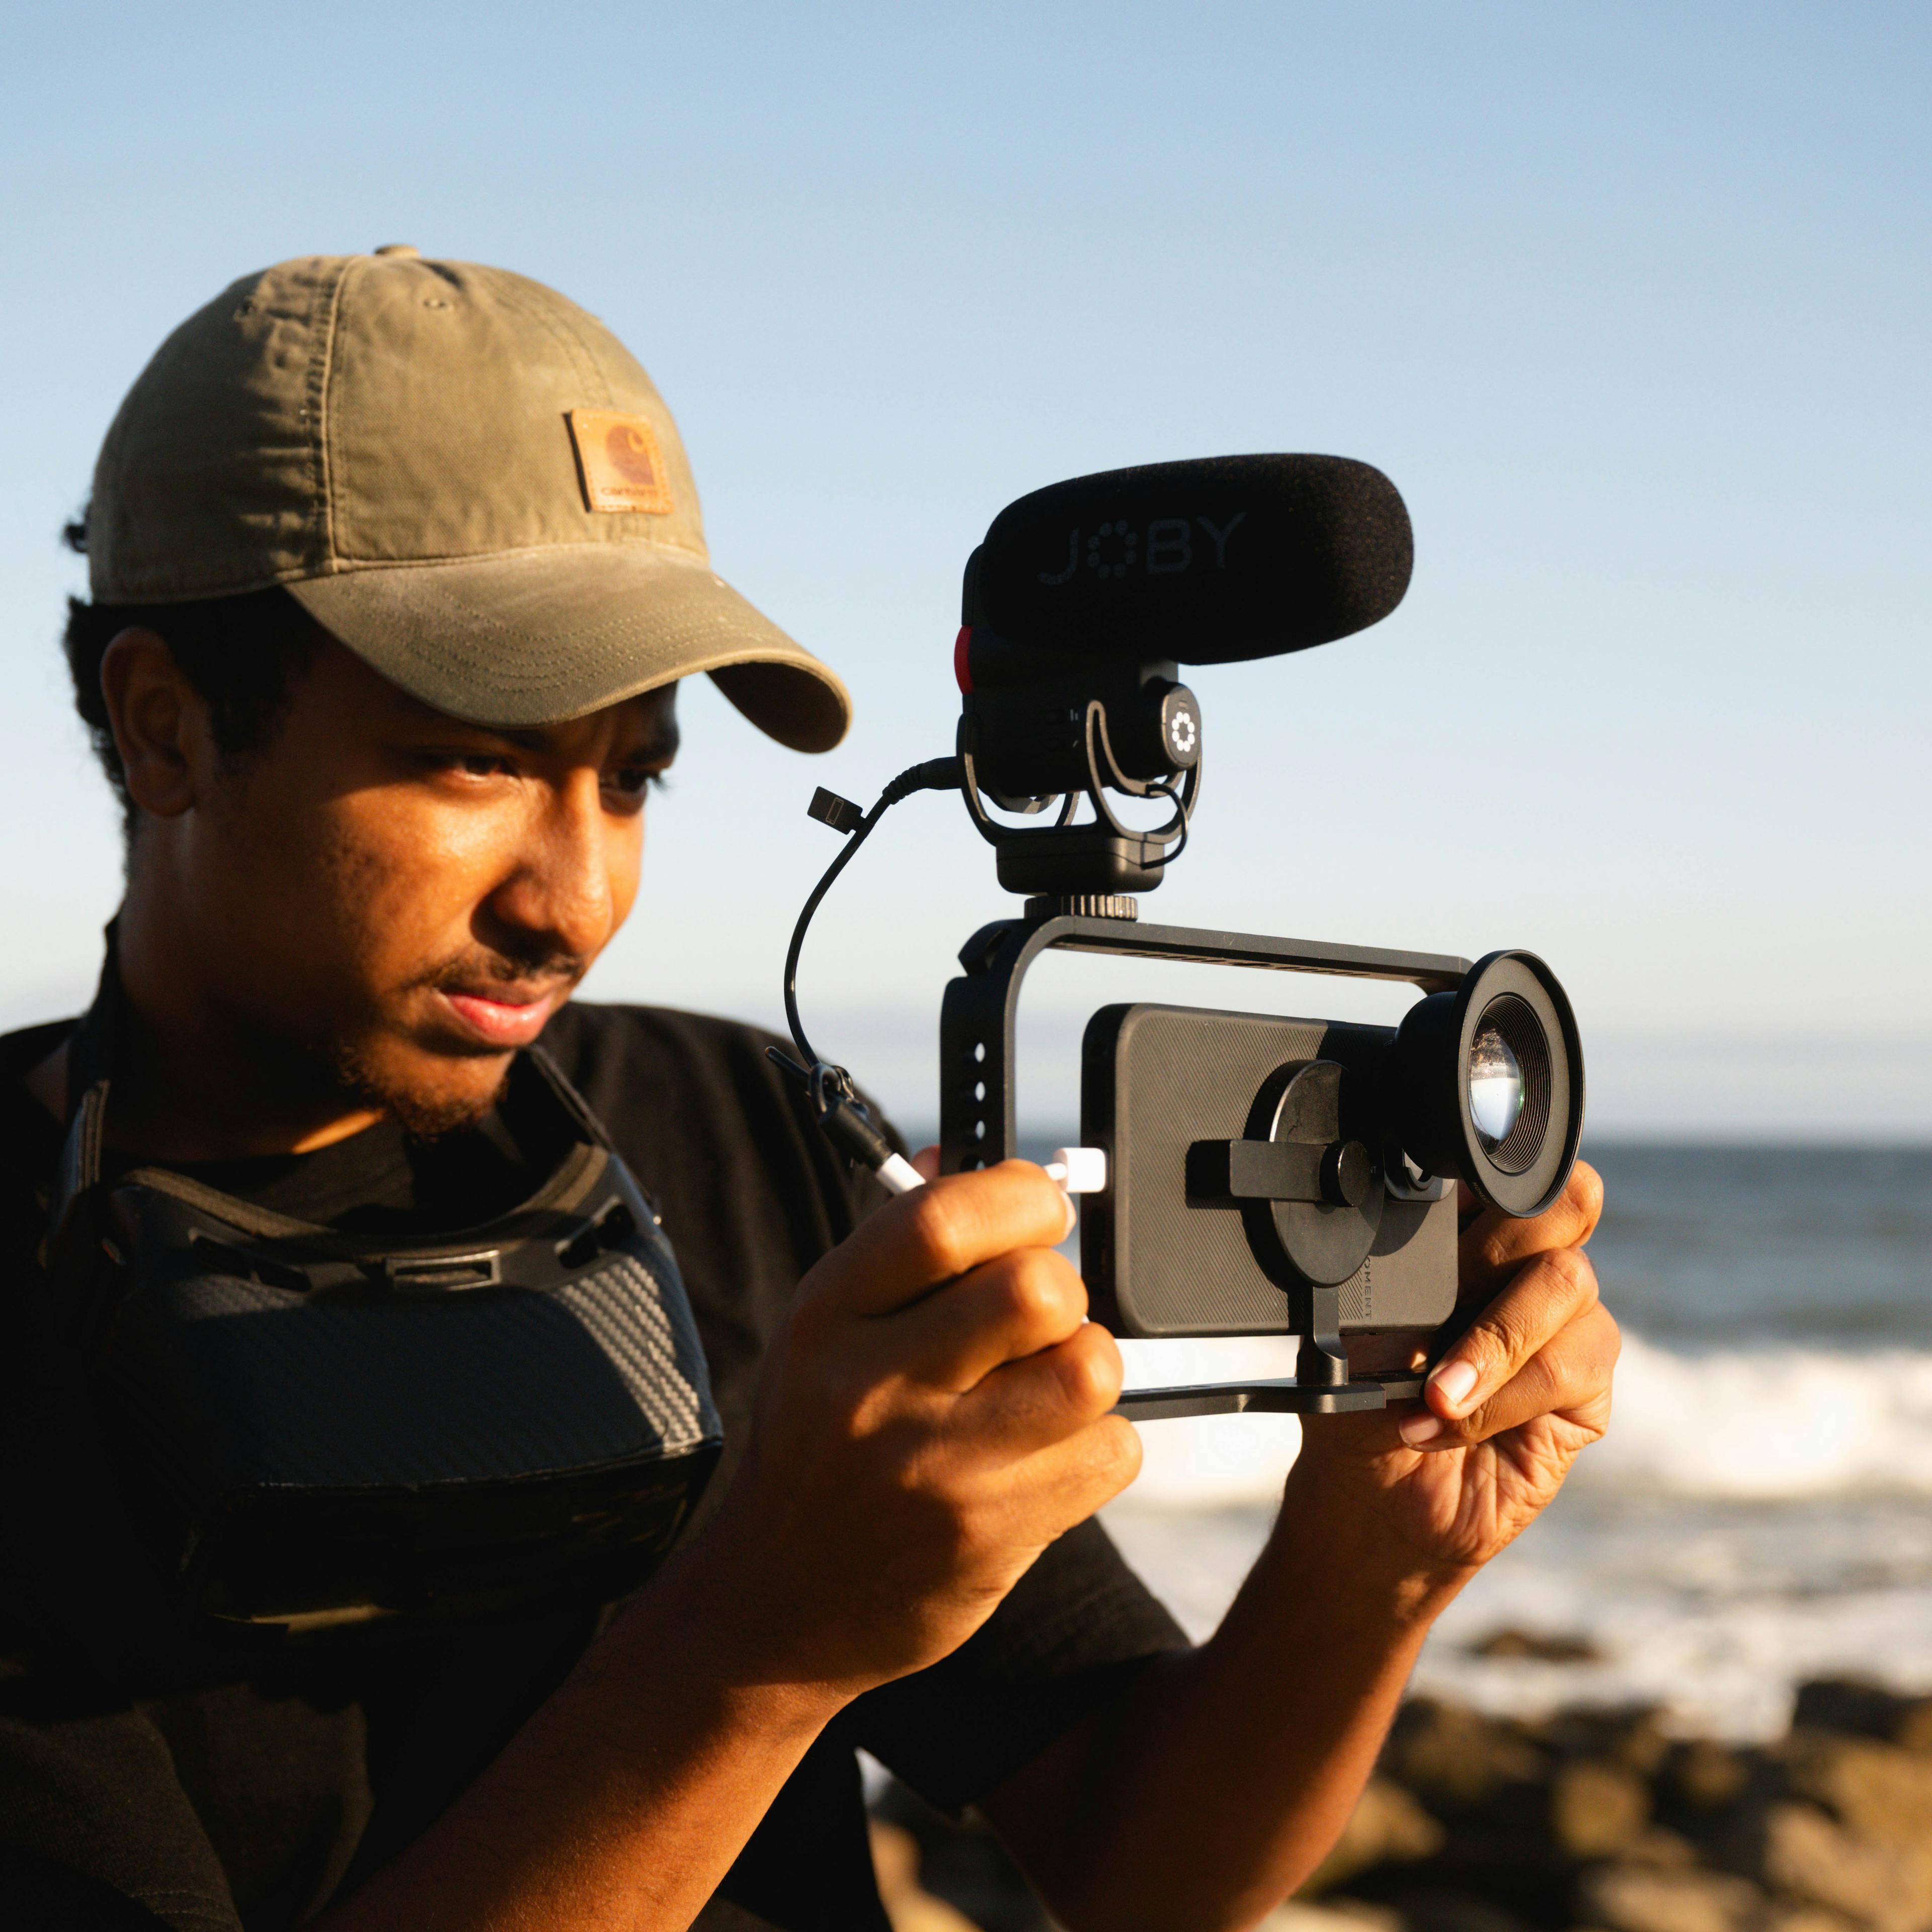 Man shooting a mobile rig with microphone on the beach